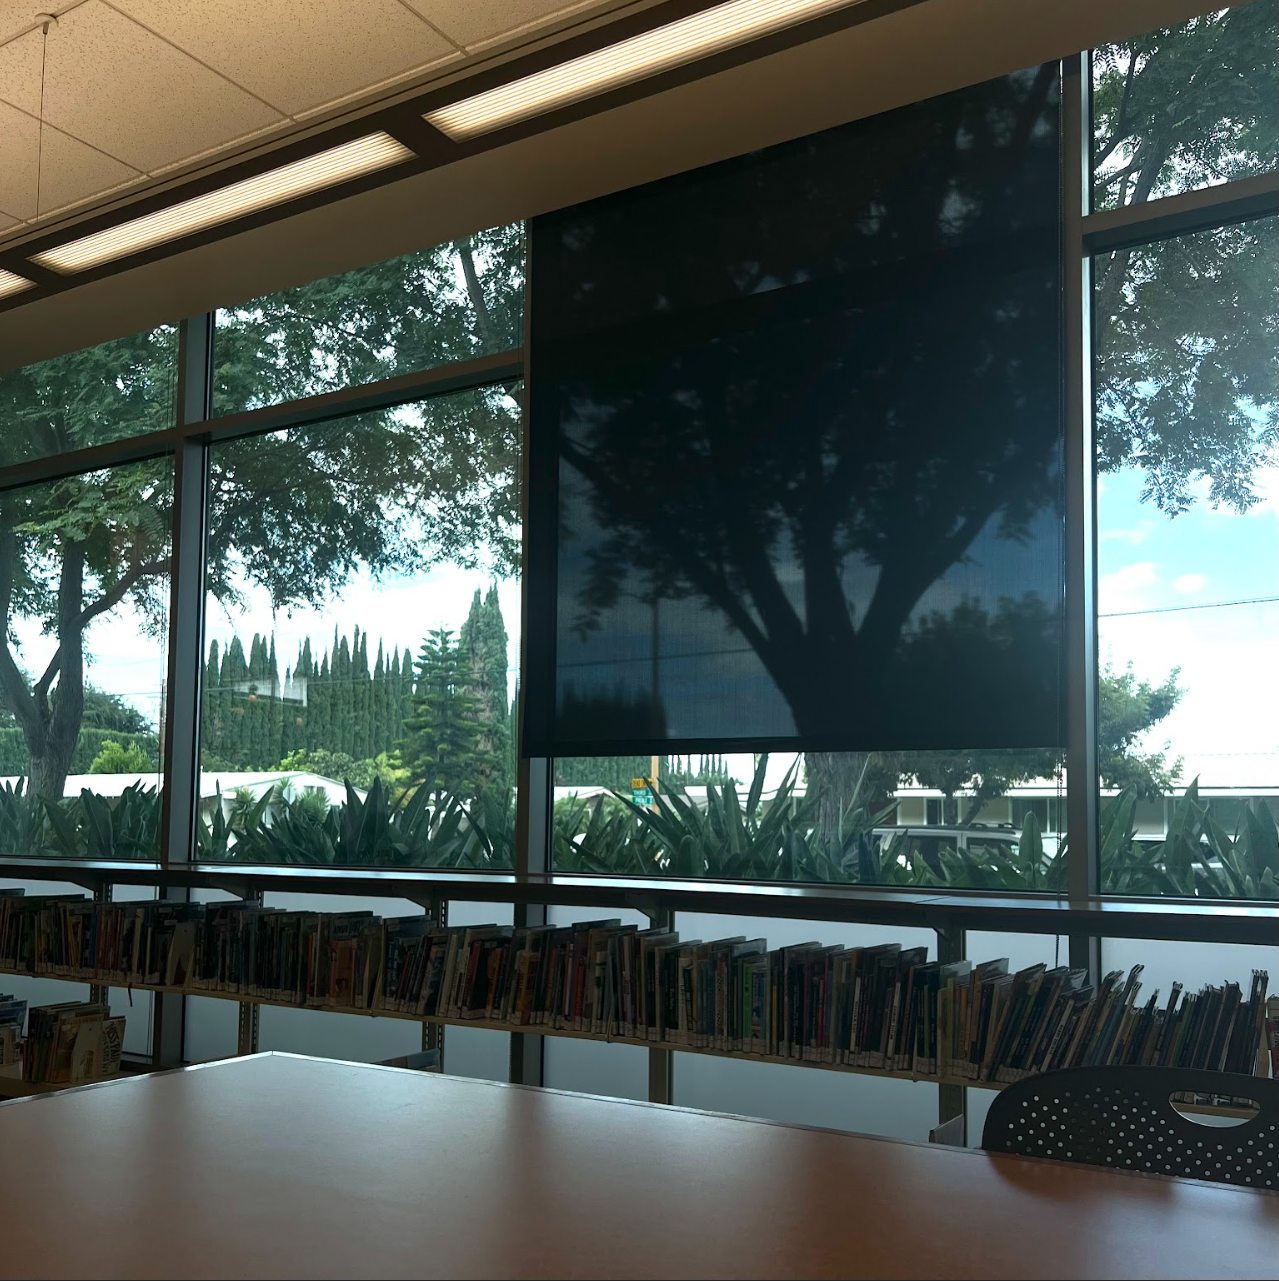 Natural light in a classroom setting greatly influences our mental well-being